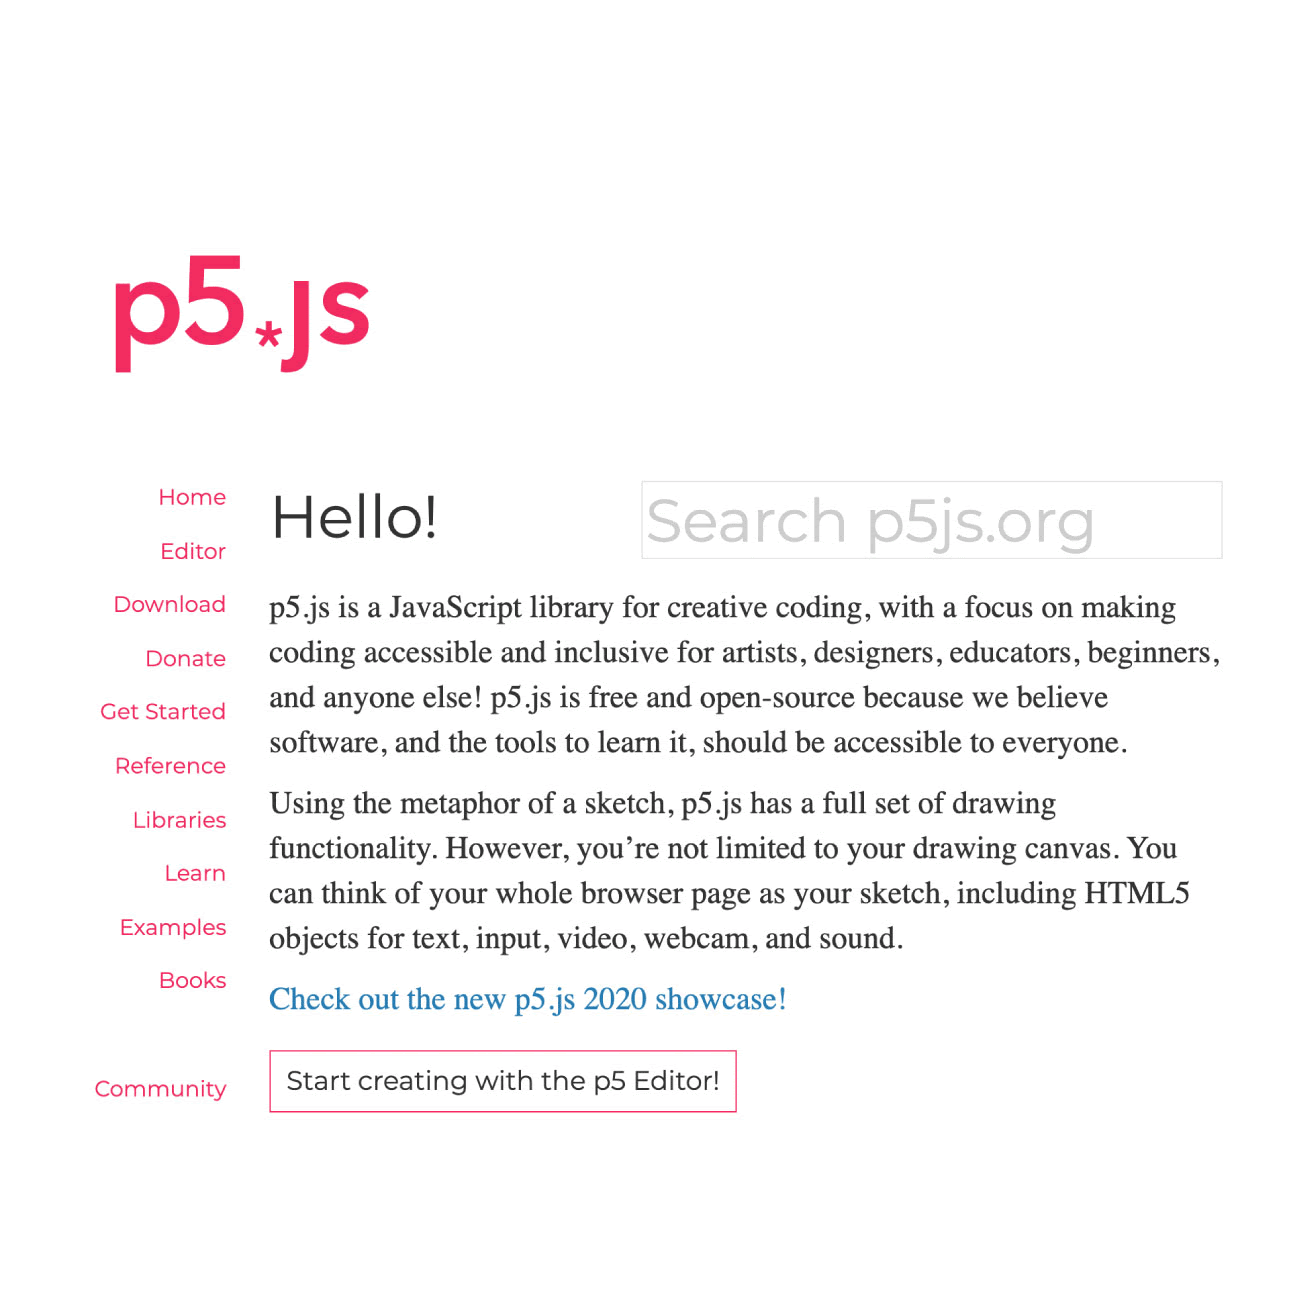 An animated gif of the p5.js homepage with some words translated into Portuguese. A smiley face is animated in the bottom corner.